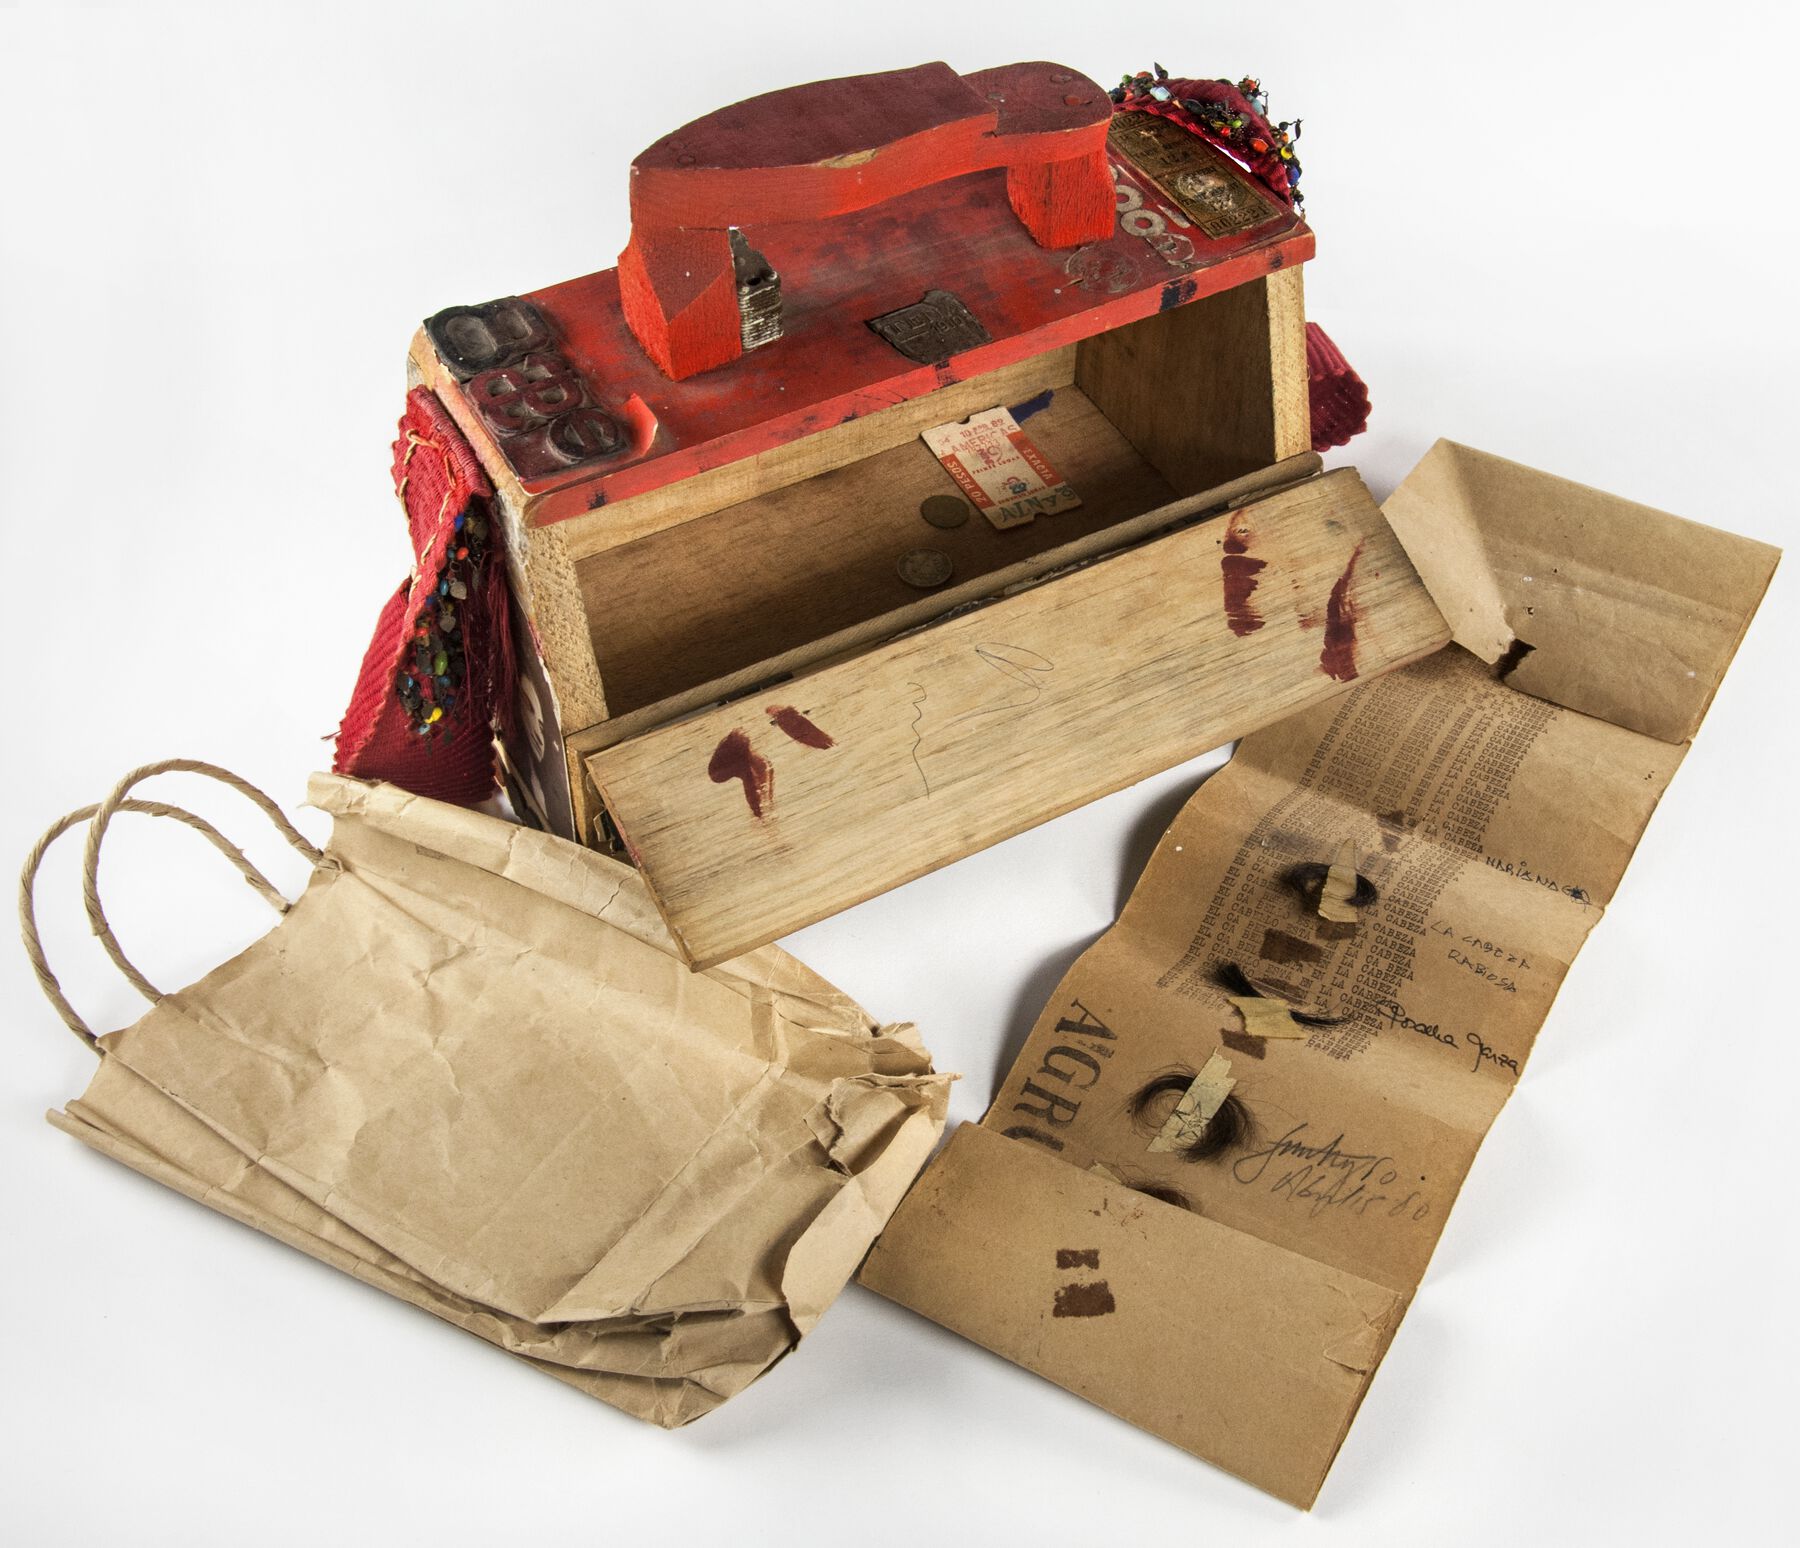 A open wooden shoeshine box with a brown paper bag laying on the left side and a manuscript spread out on the right side